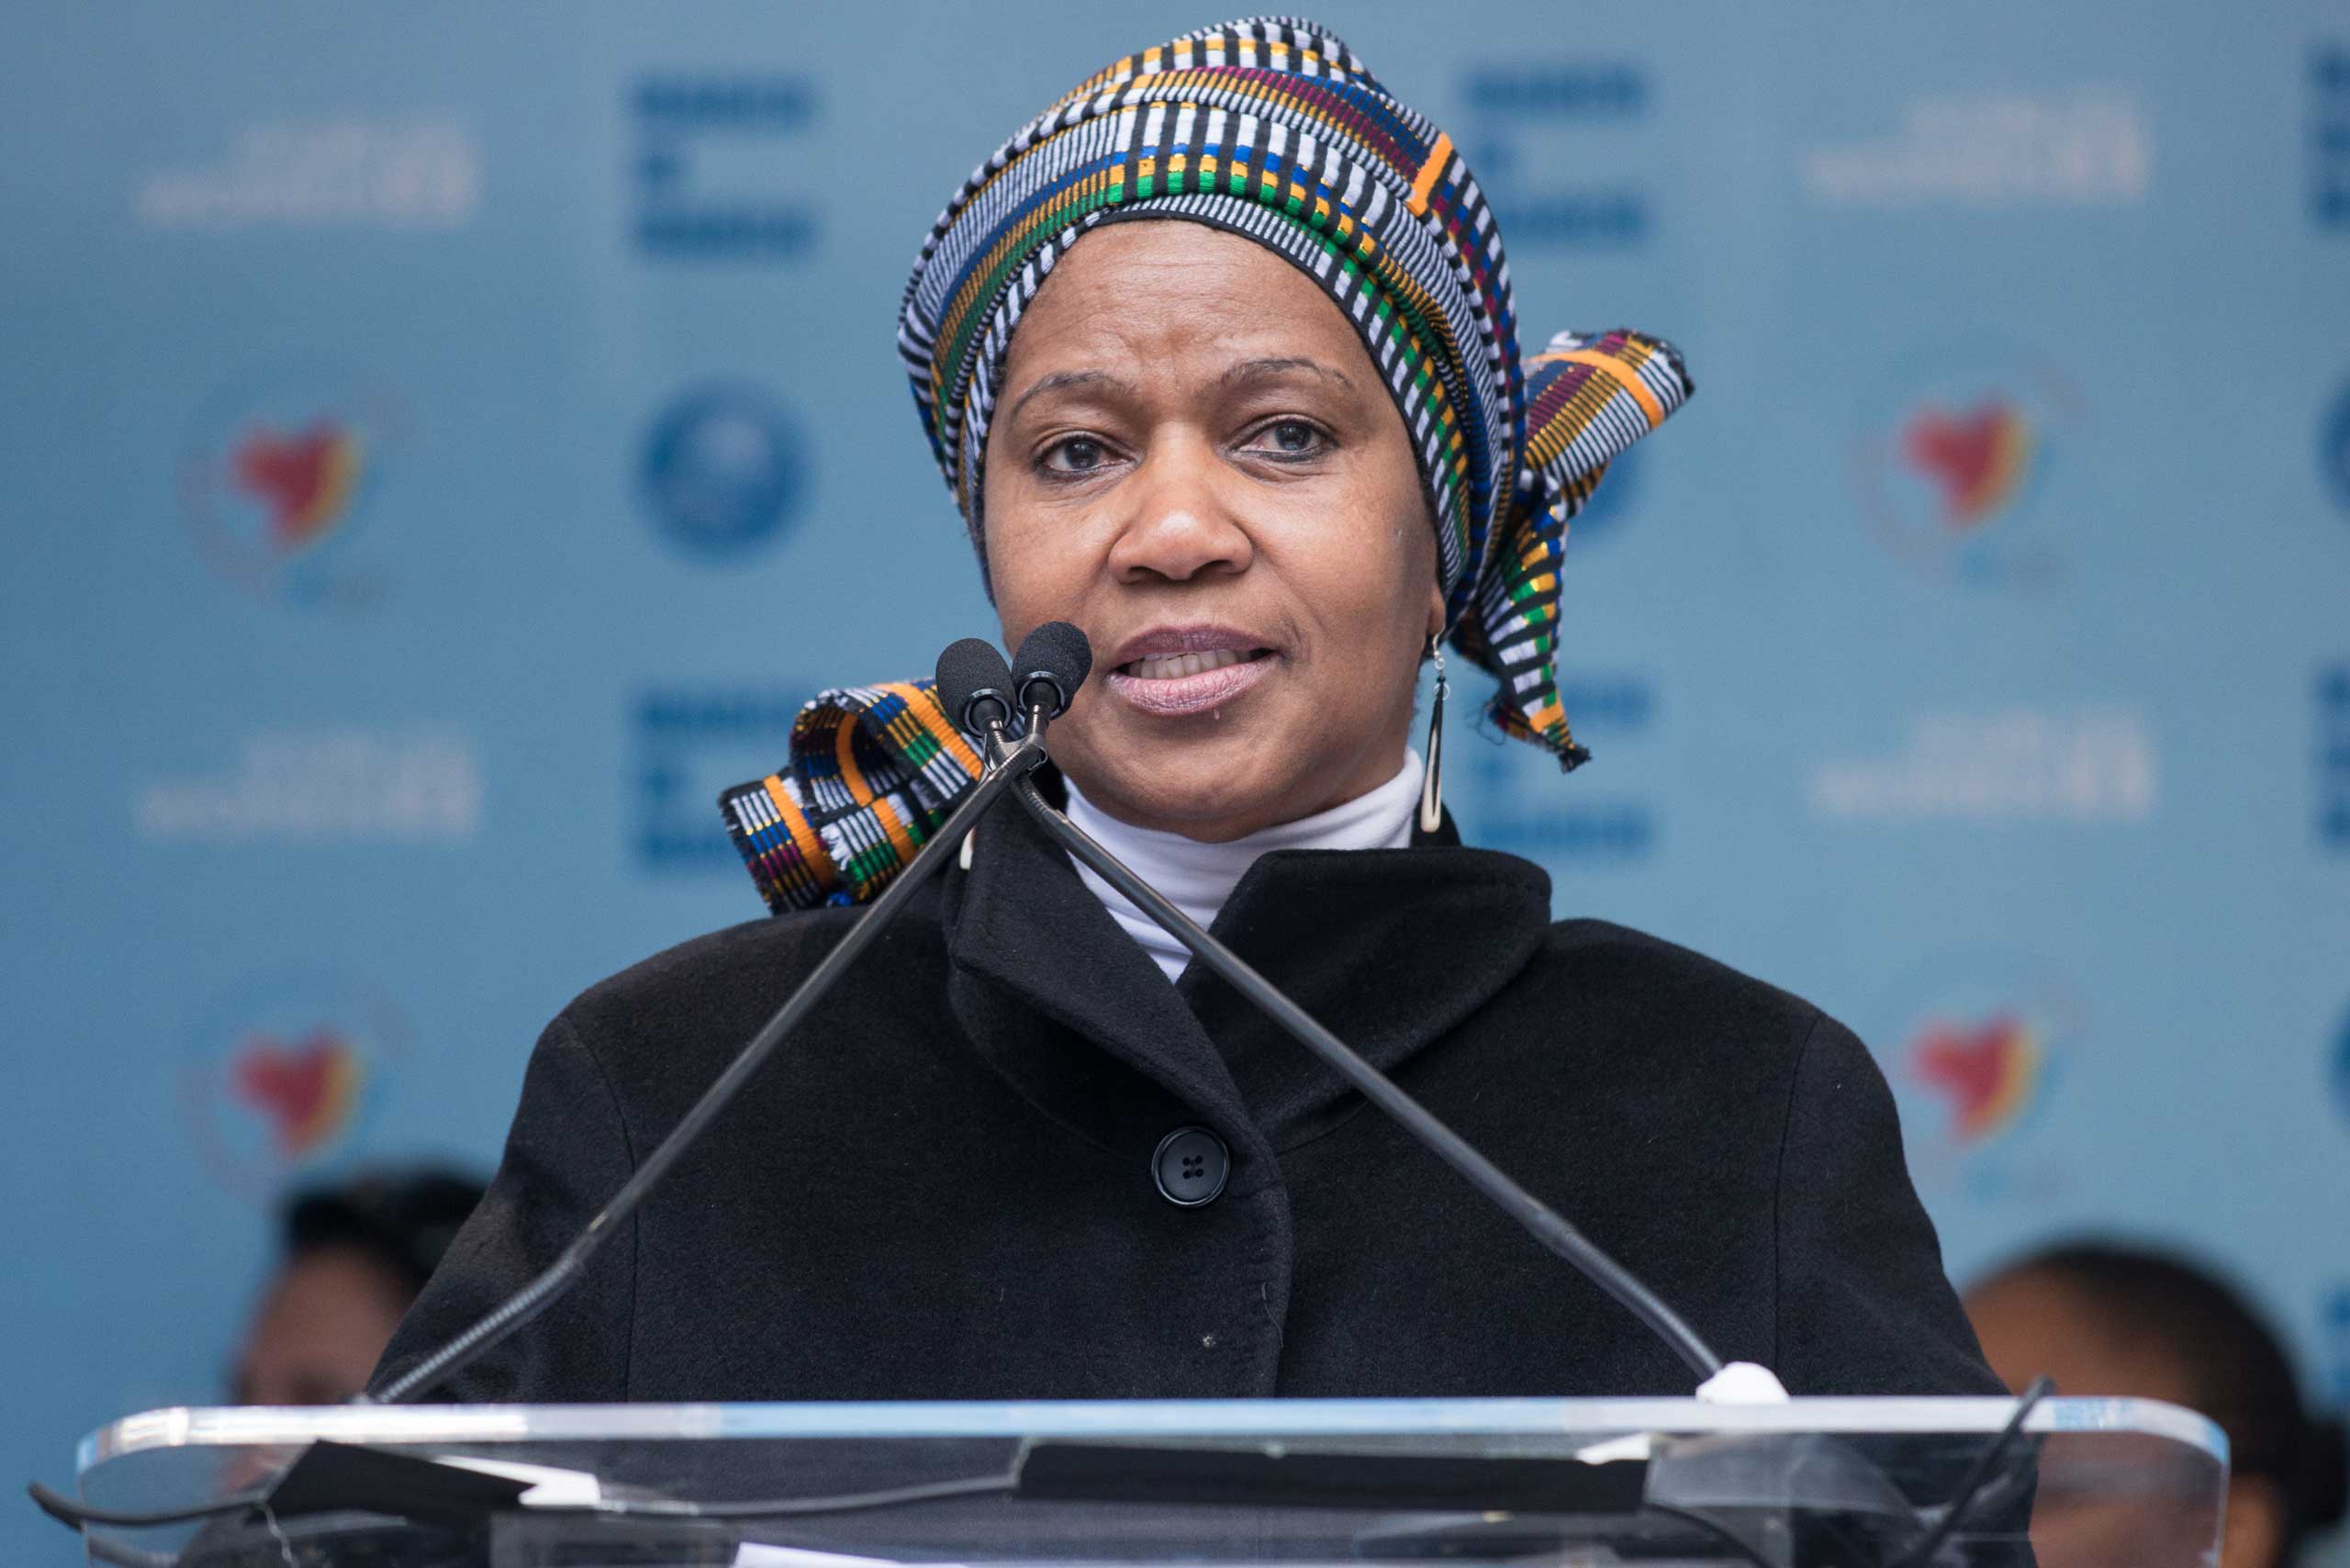 Assistant Secretary General Phumzile Mlambo-Ngcuka attends the 2015 International Women's Day March at Dag Hammarskjold Plaza in New York City on March 8, 2015. (Mark Sagliocco—Getty Images)